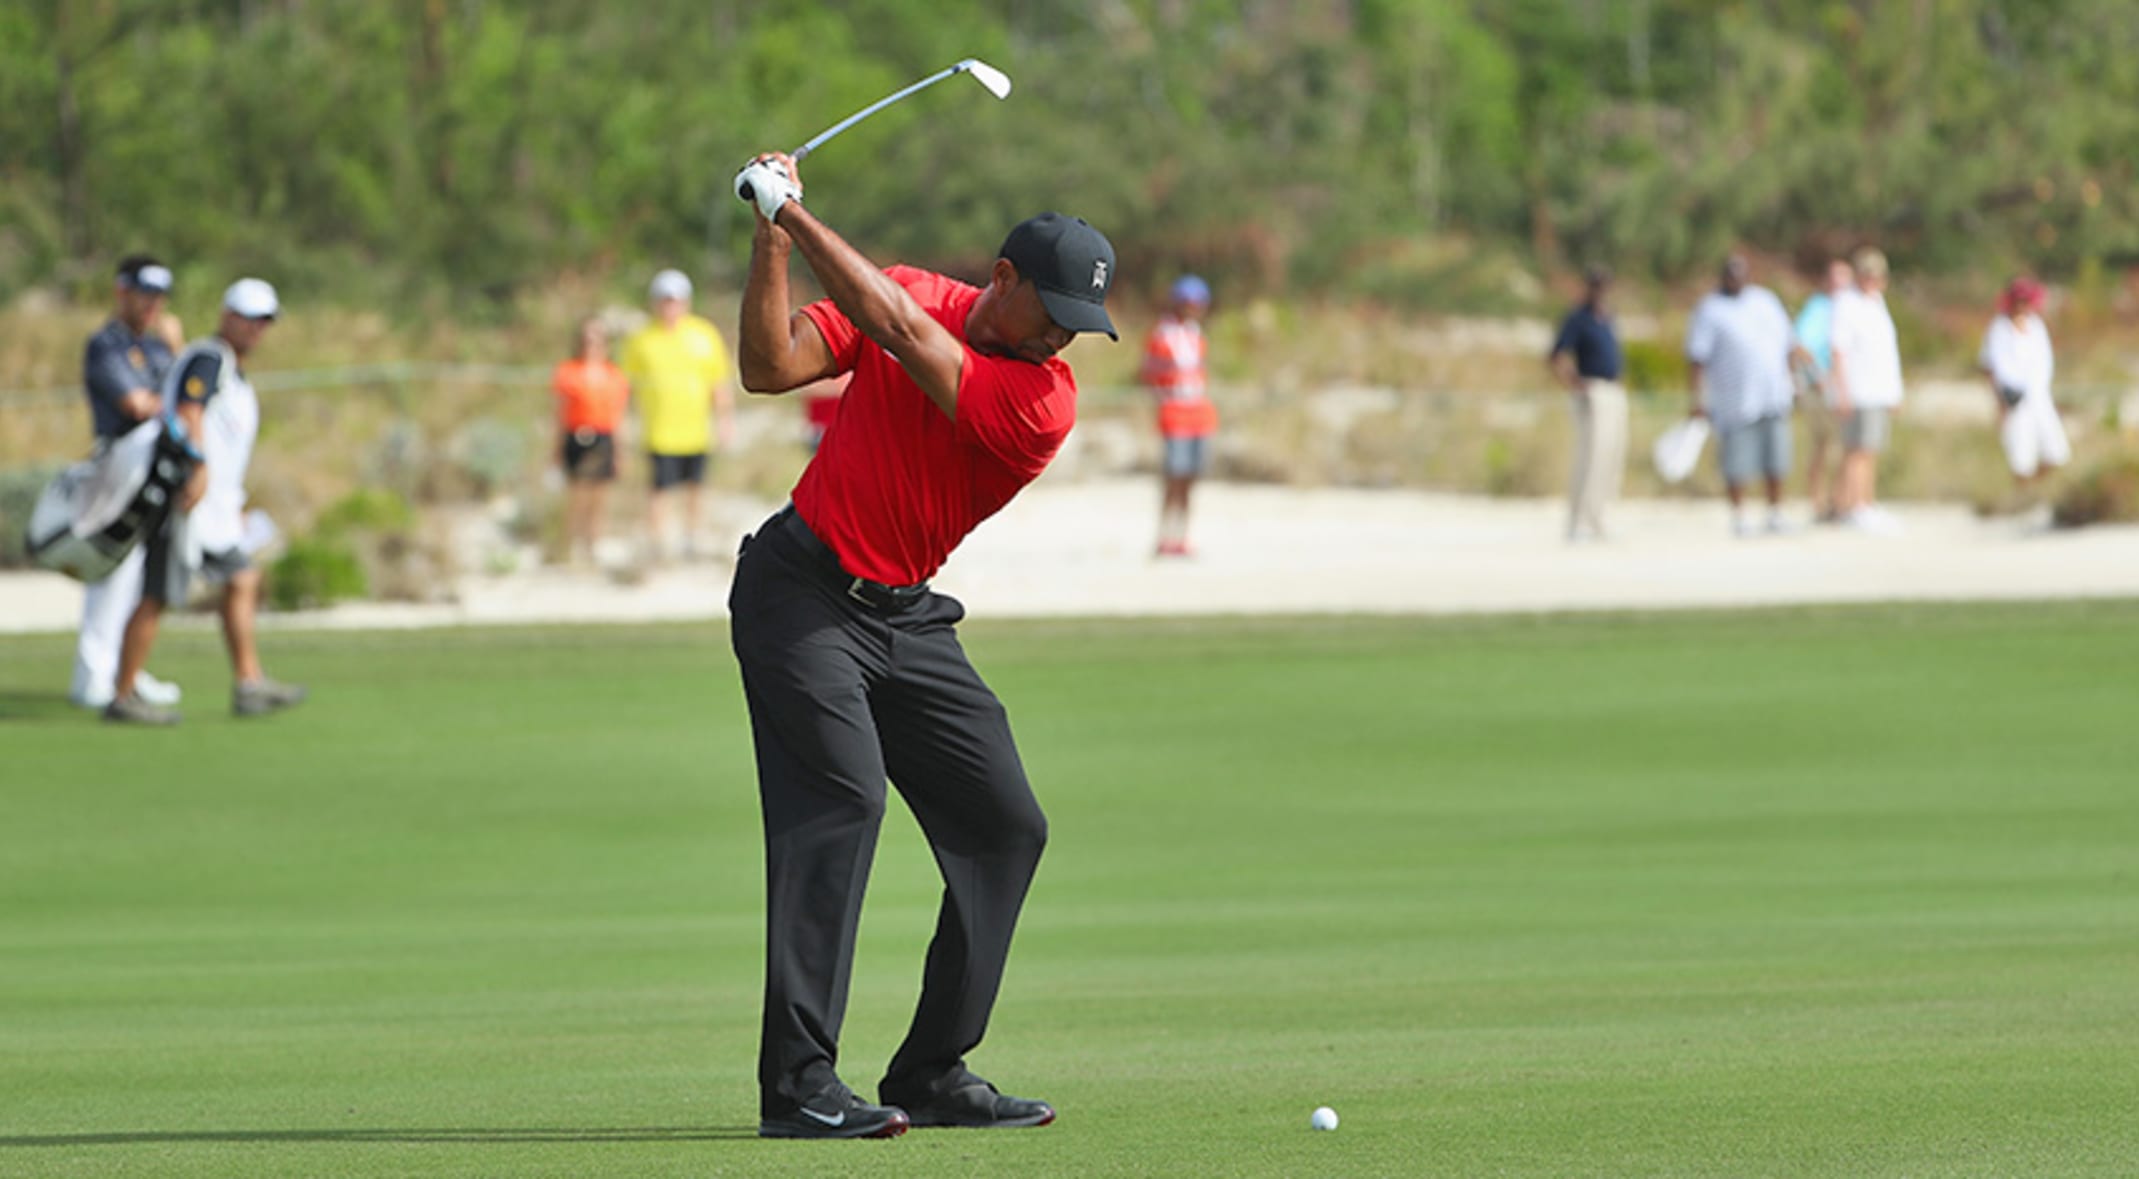 Tiger Woods mid golf swing, taken from behind